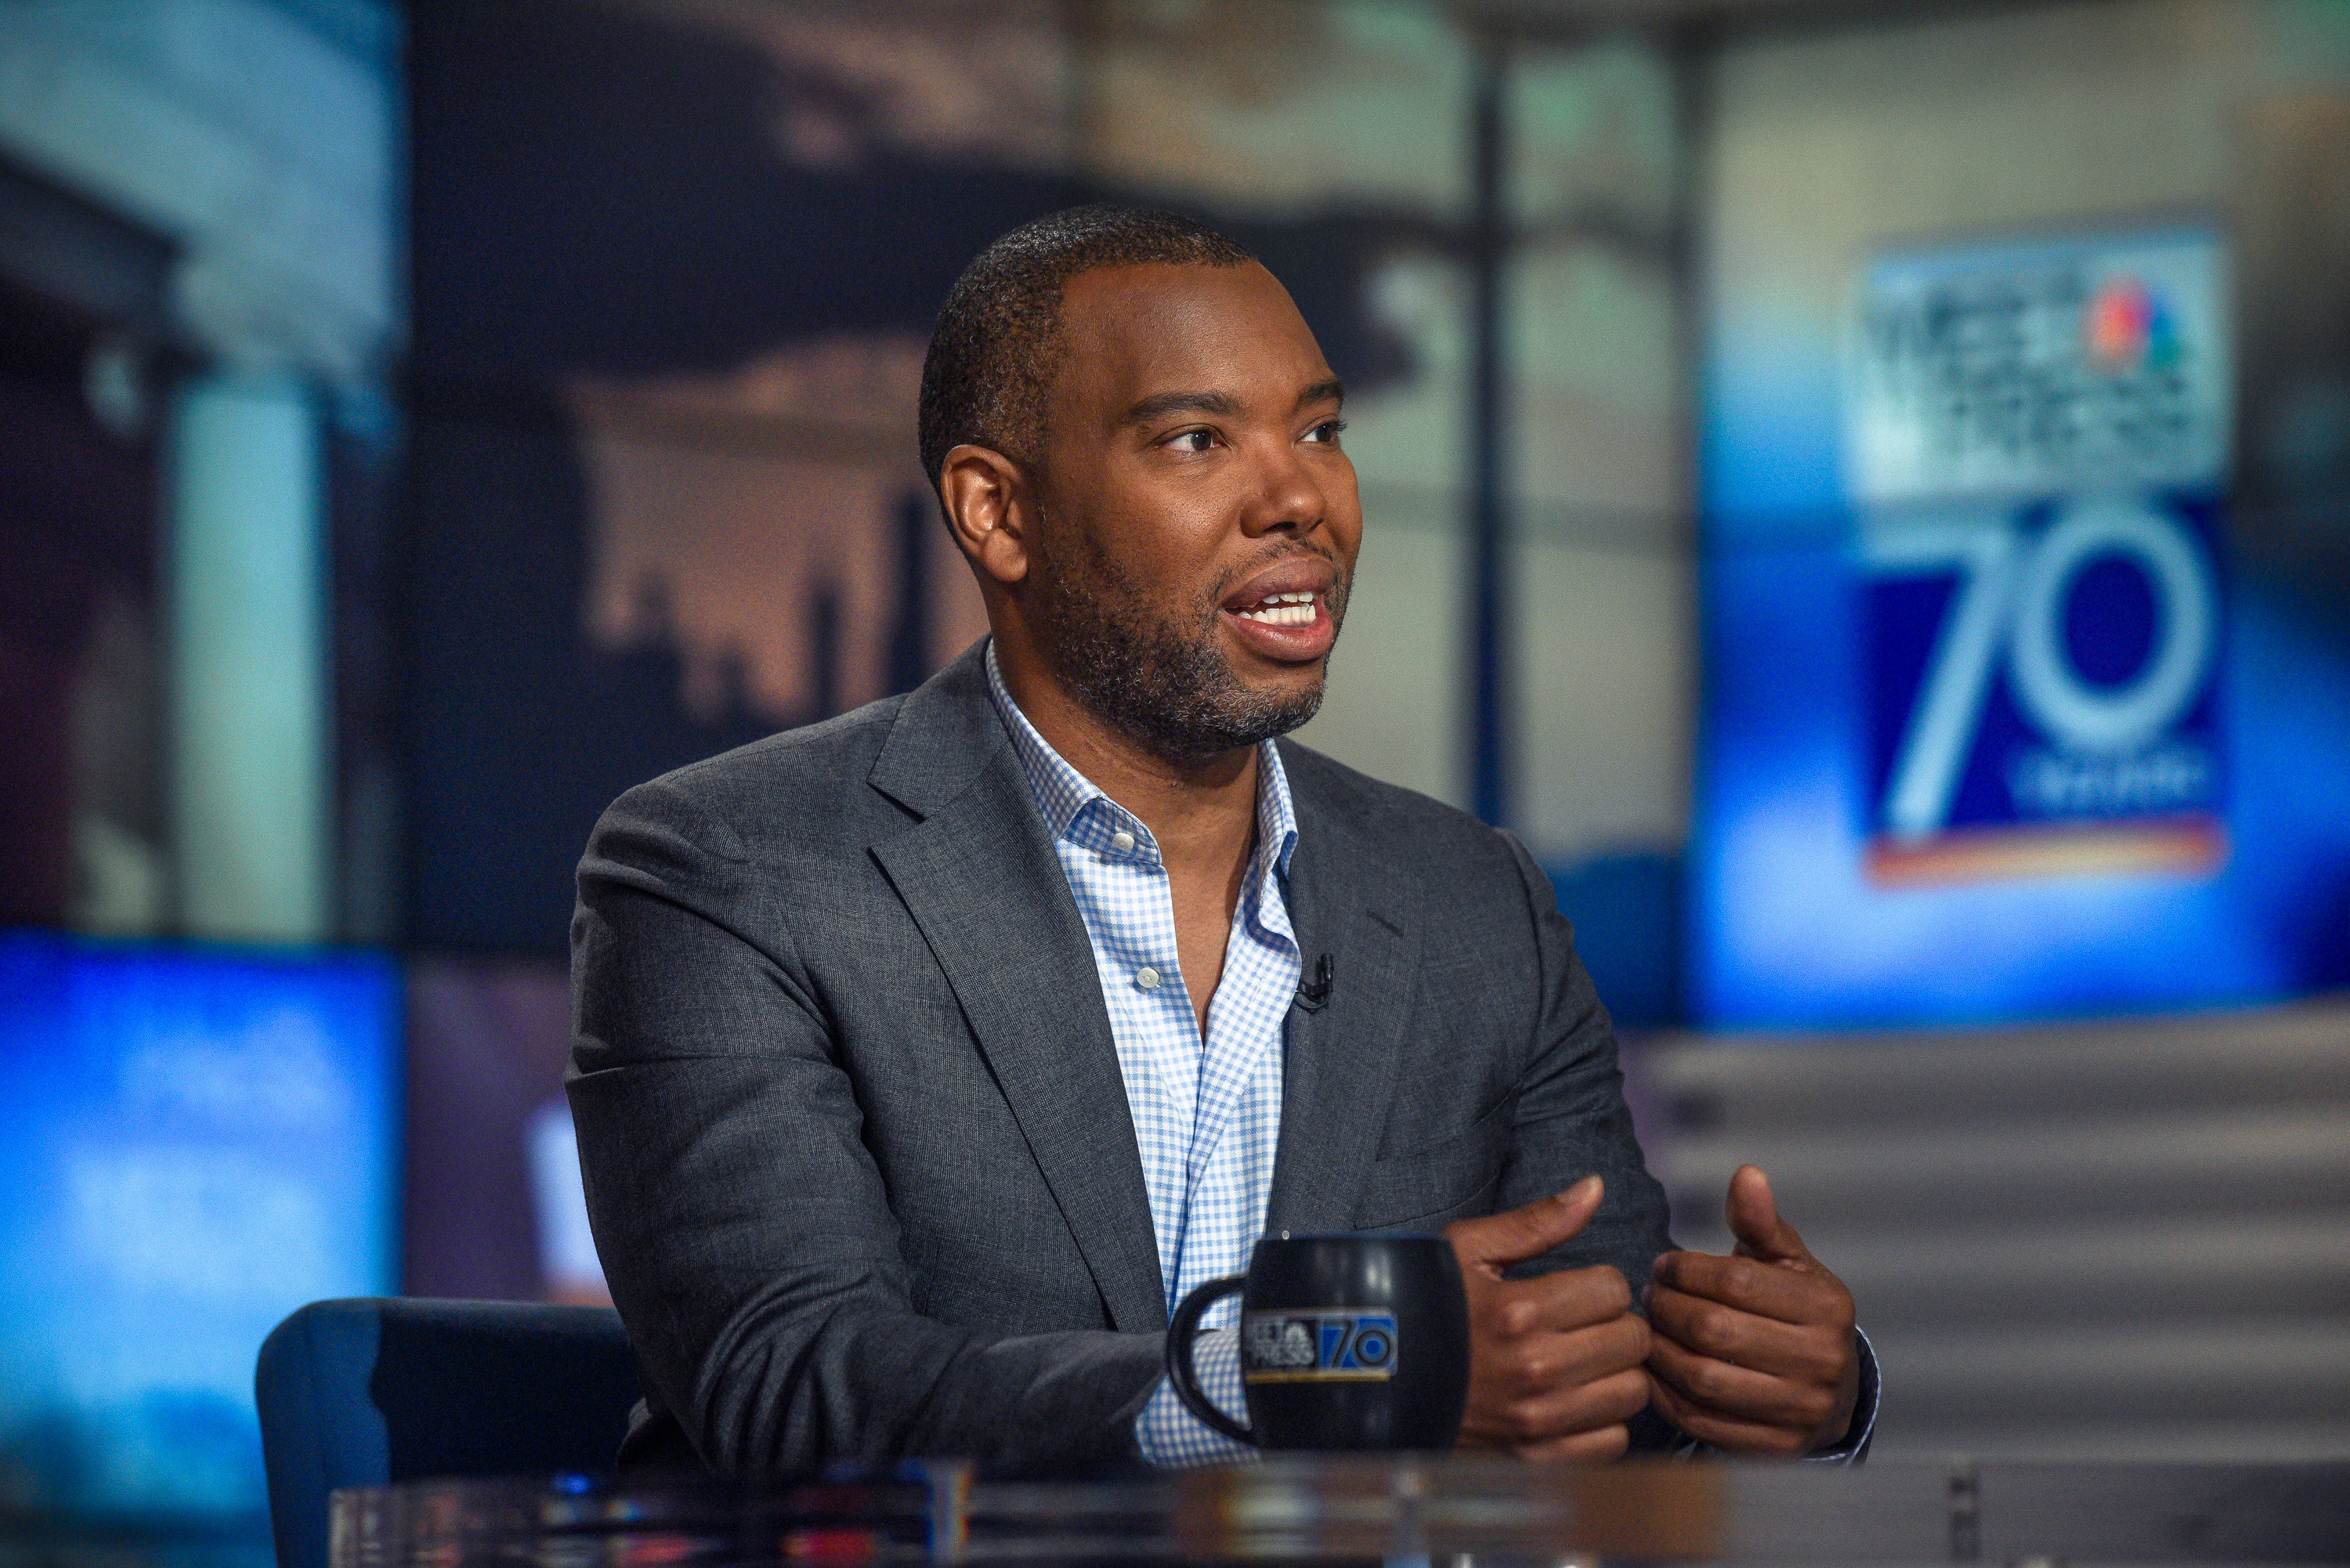 Ta-Nehisi Coates Perfectly Explains Why White People Shouldn't Use The N-Word
